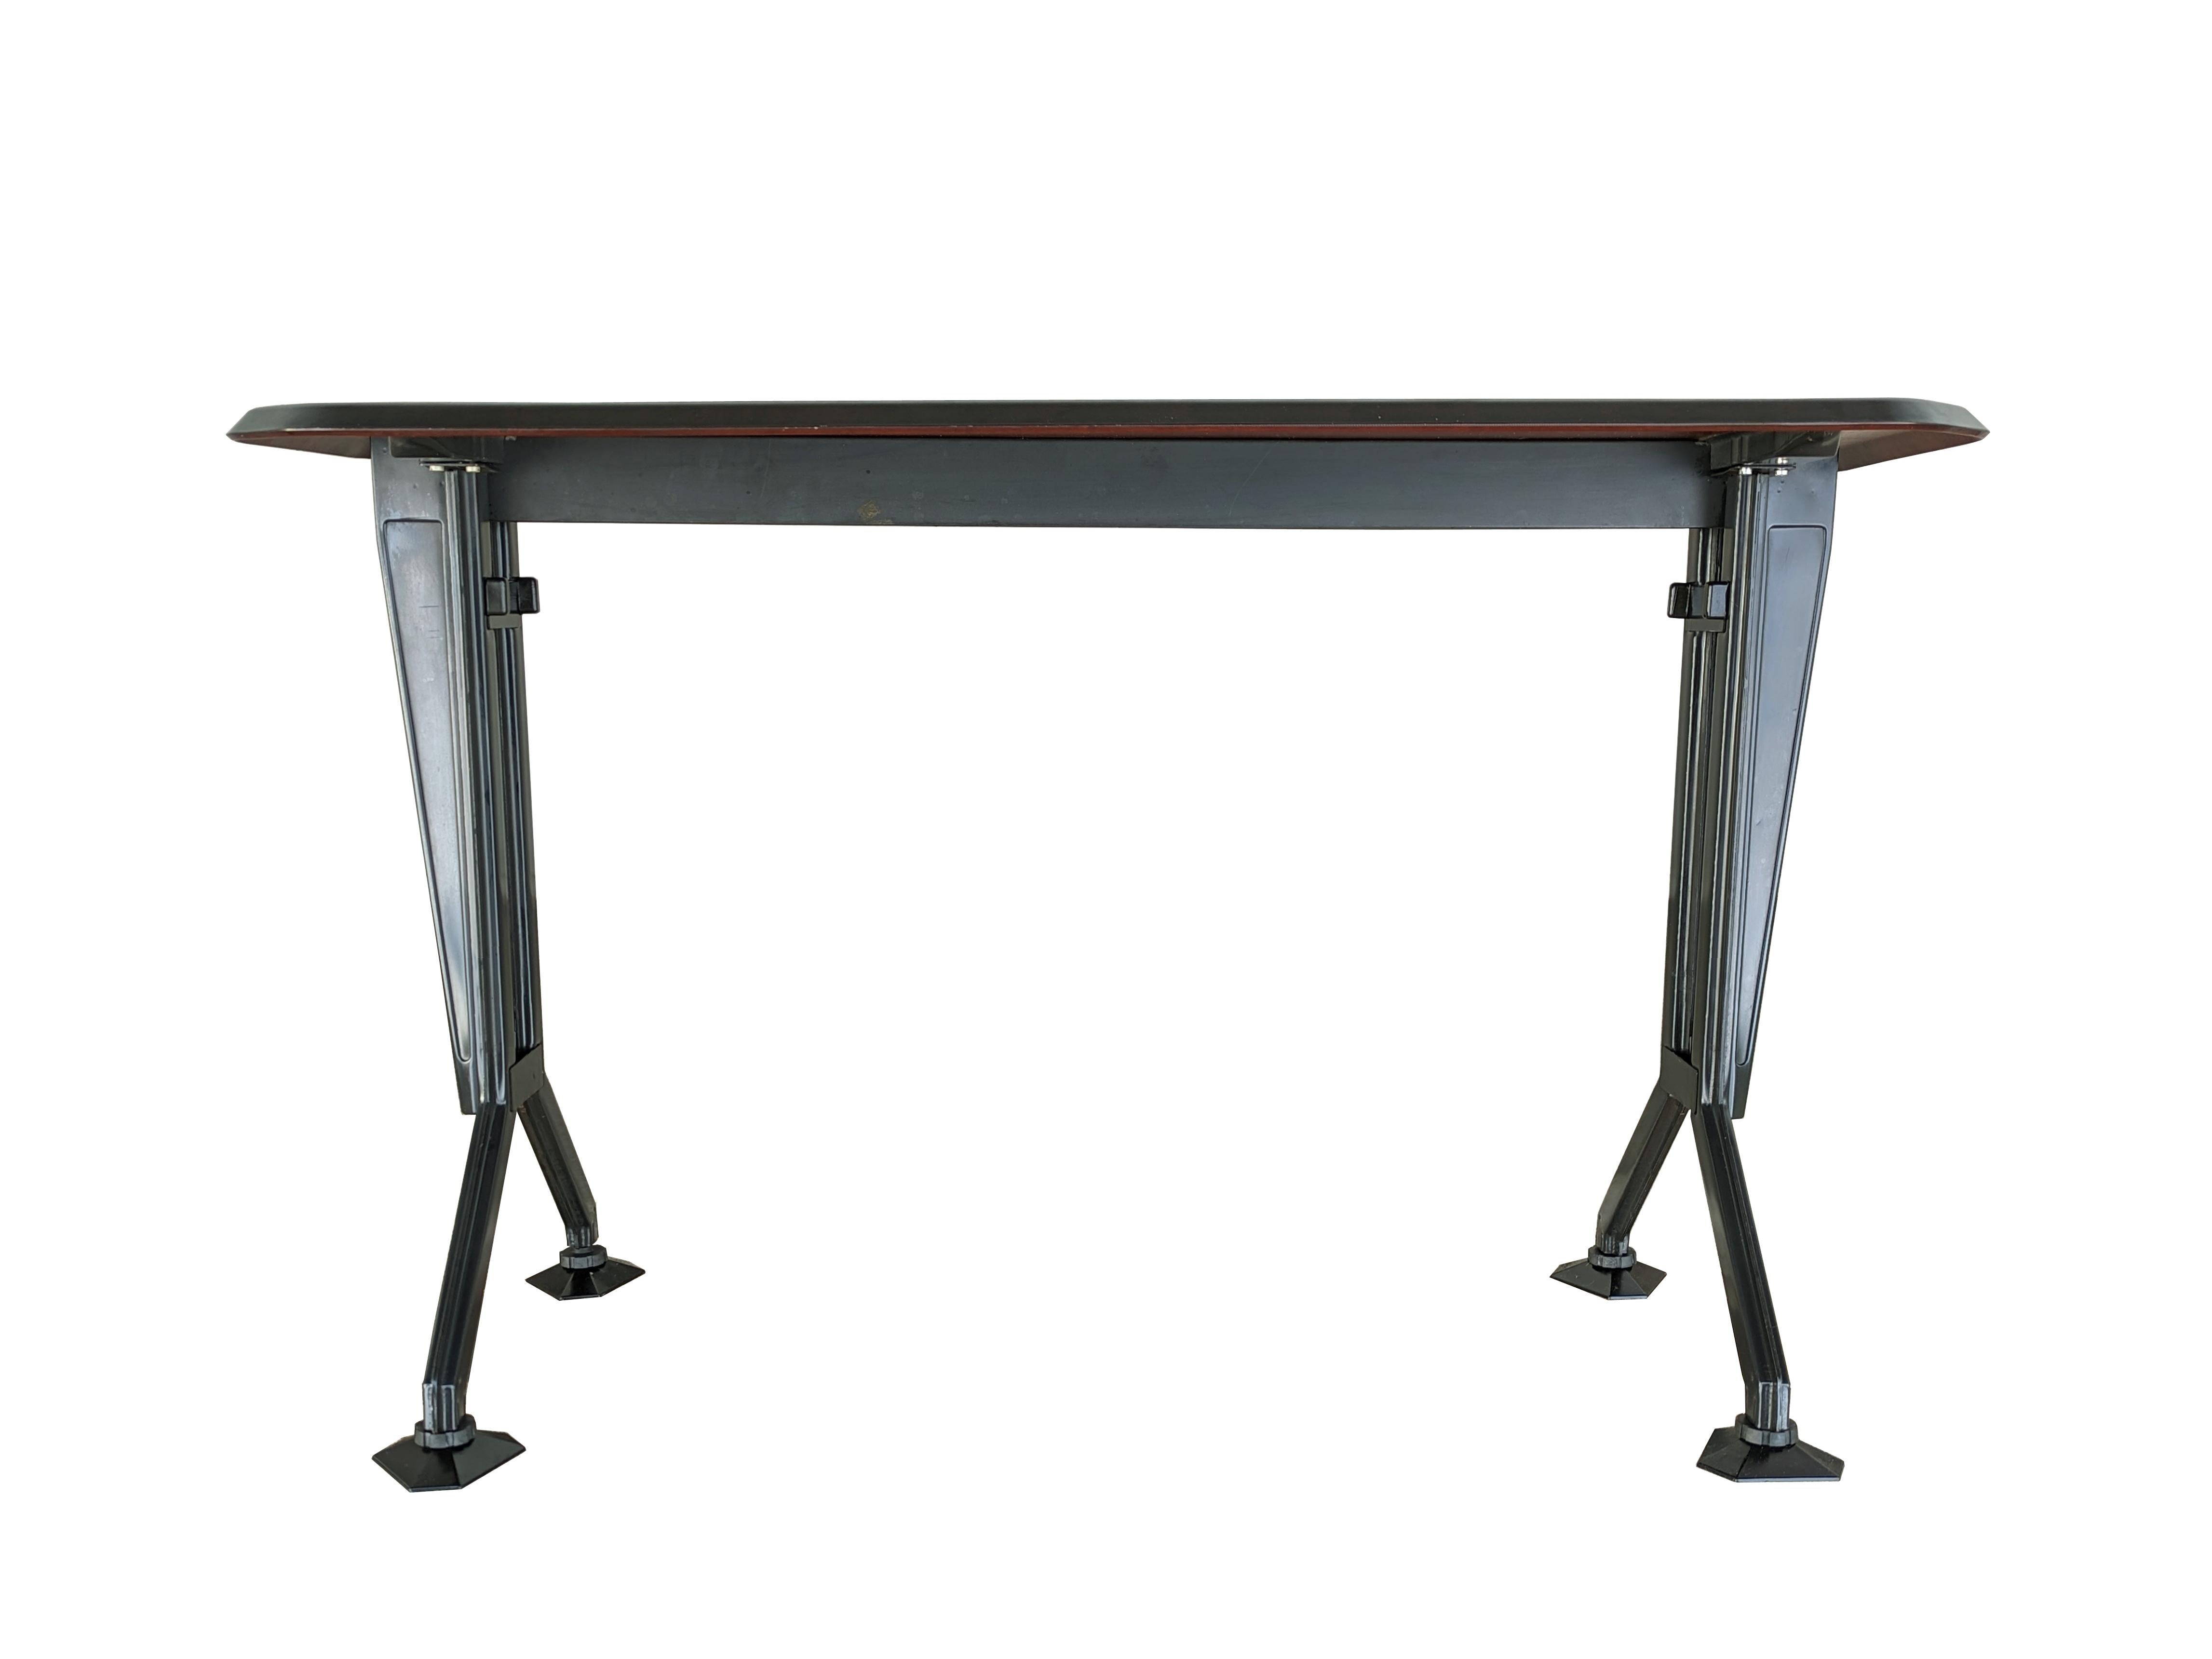 small typist's desk, arco model for olivetti synthesys. Ideal as a console, service table or additional support surface for the main desk. Historic piece of Italian design from the 60s designed by the BBPR studio in different versions.
normal signs